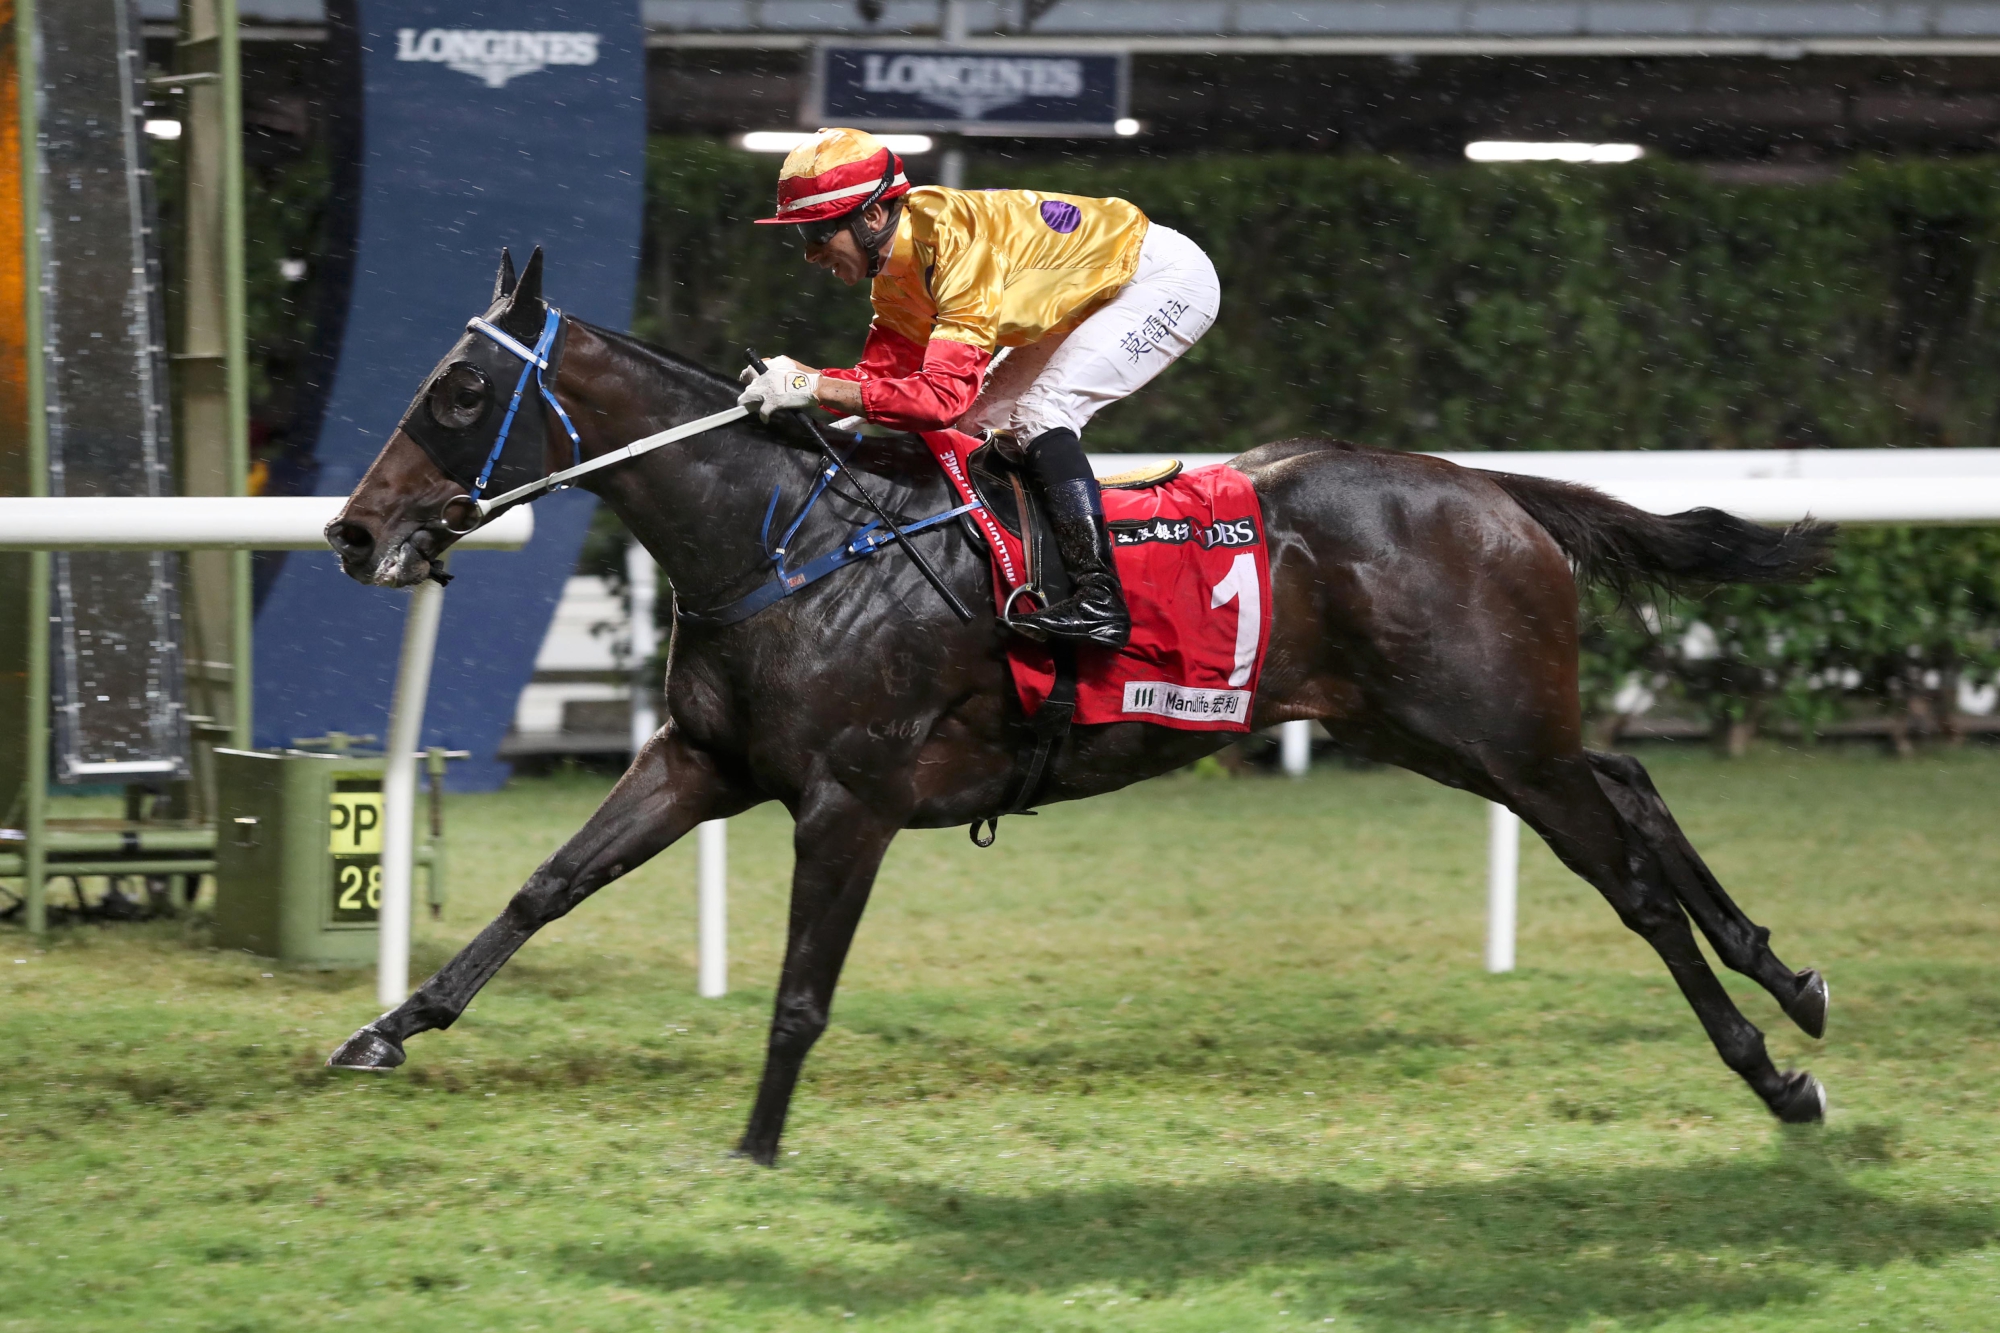 Columbus County – HK : One-time BMW Hong Kong Derby hope who has since won twice; last-start third in G2 Jockey Club Cup.